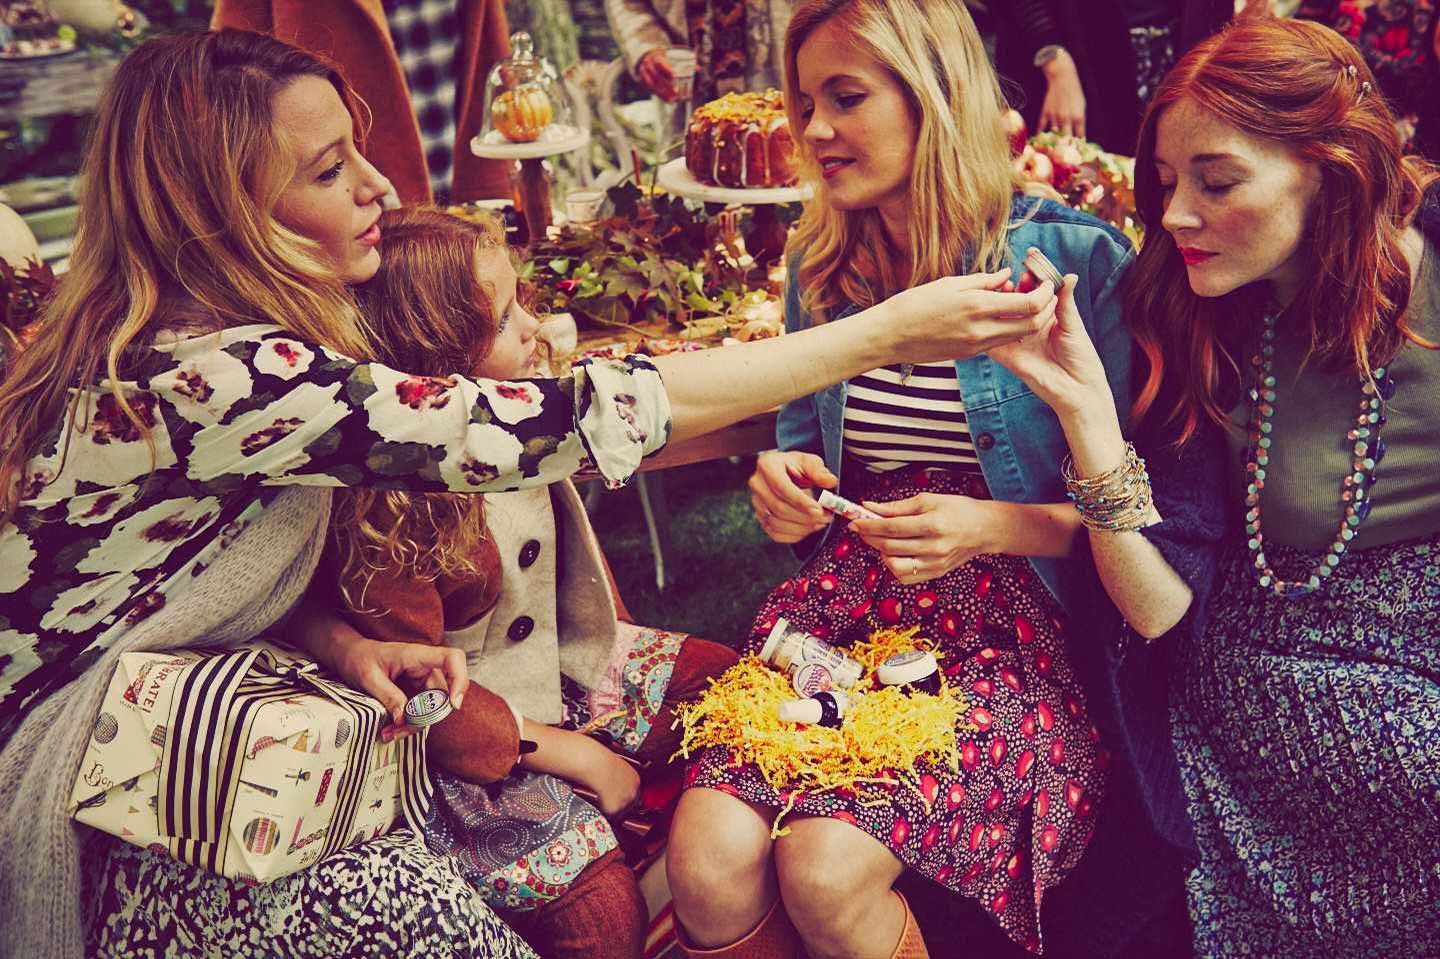 Blake Lively Shares Baby Shower Photos